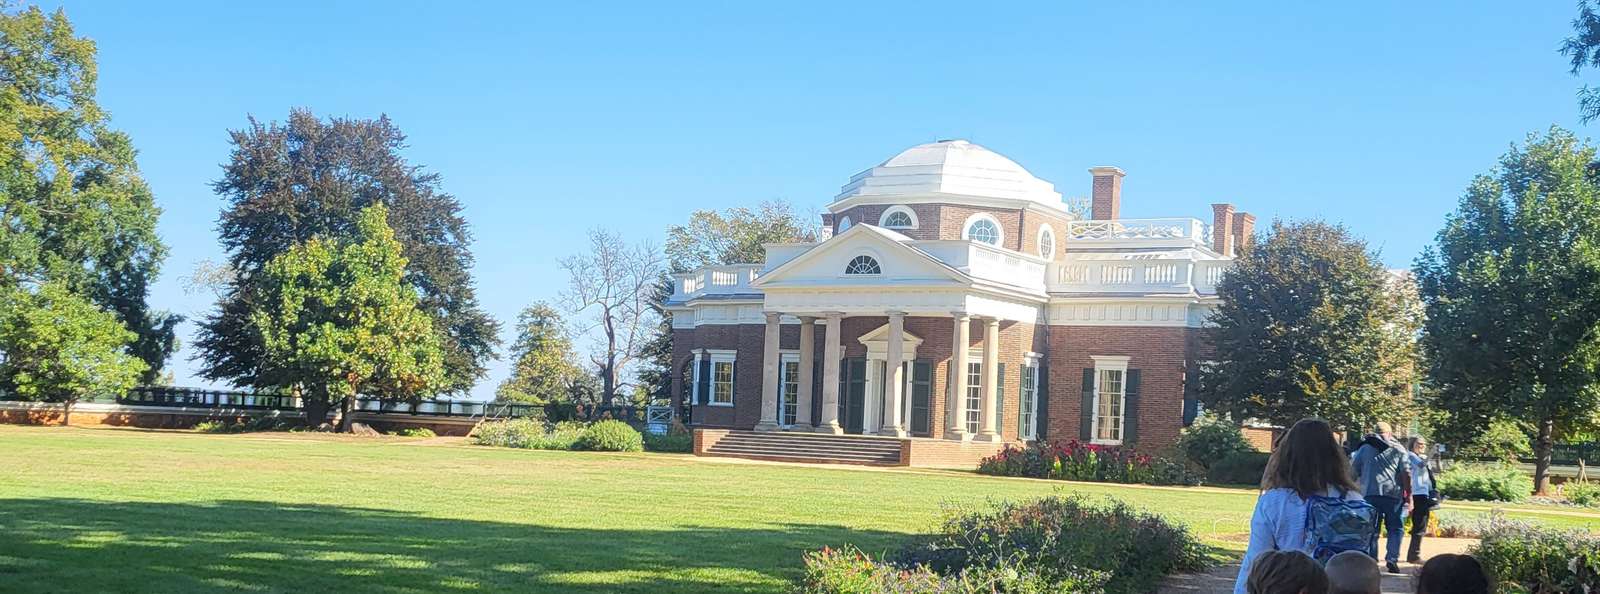 Monticello puzzle online from photo